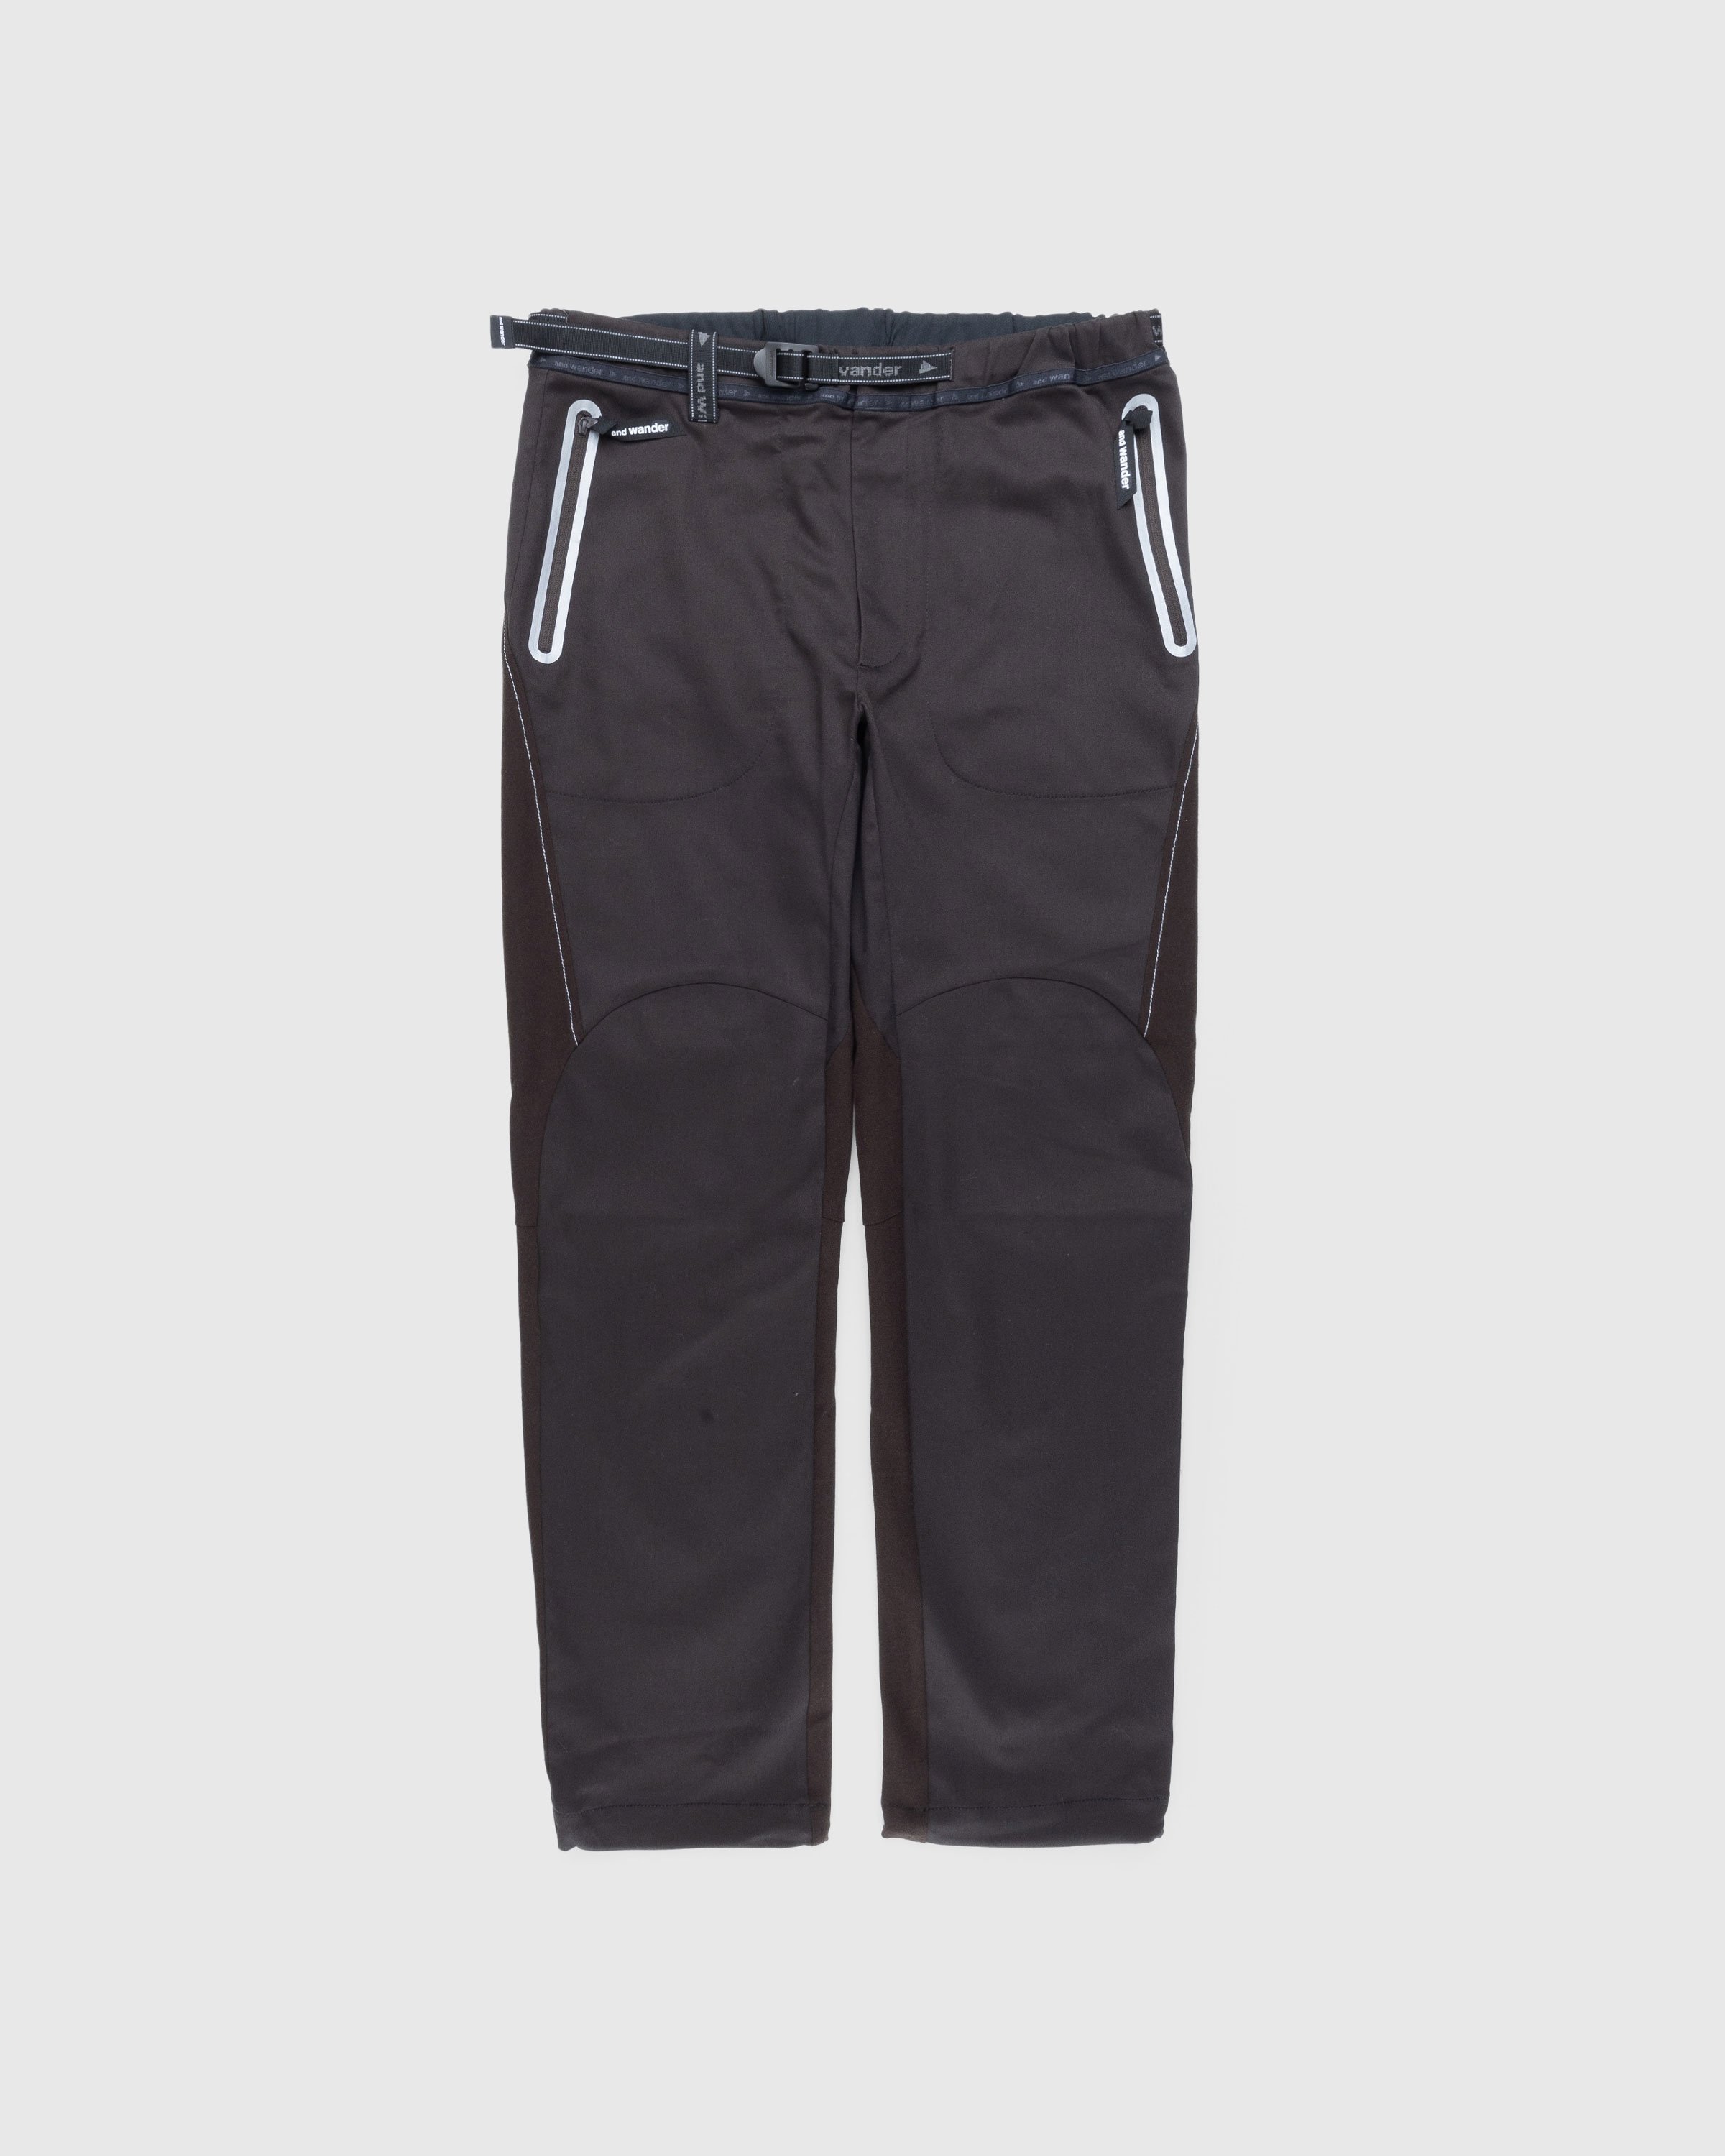 And Wander – Air Hold Pants Brown | Highsnobiety Shop